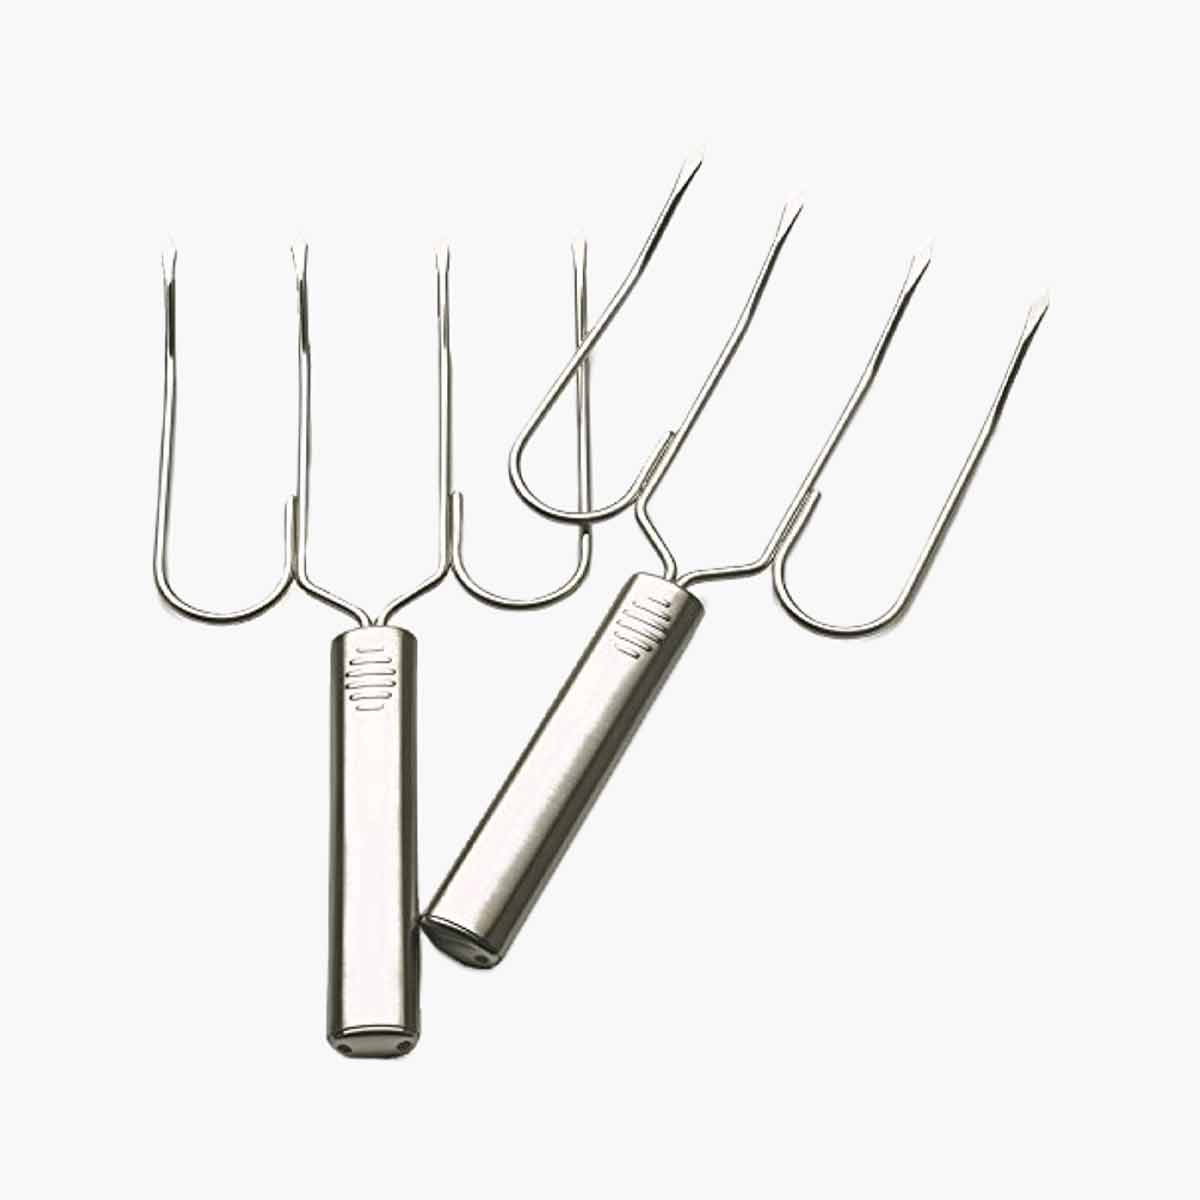 Two large turkey forks for Thanksgiving